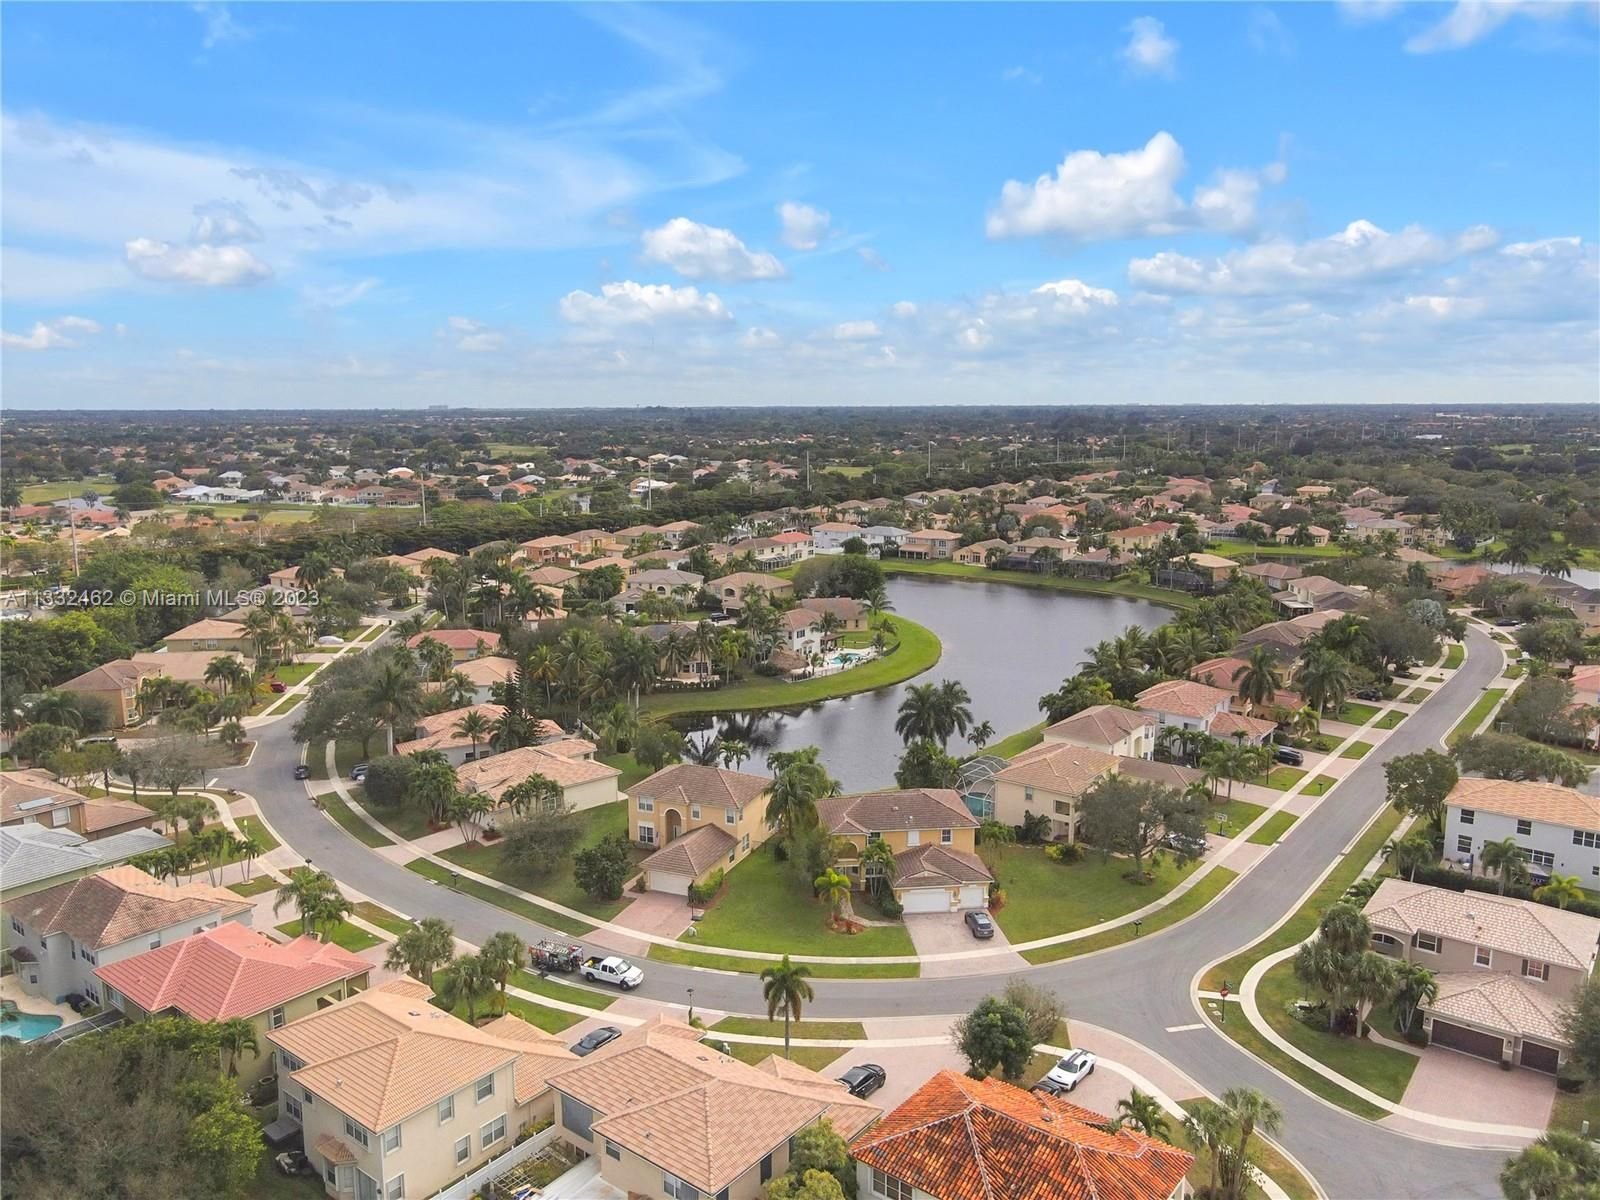 Real estate property located at 6651 Chandra Way, Palm Beach County, Lake Worth, FL